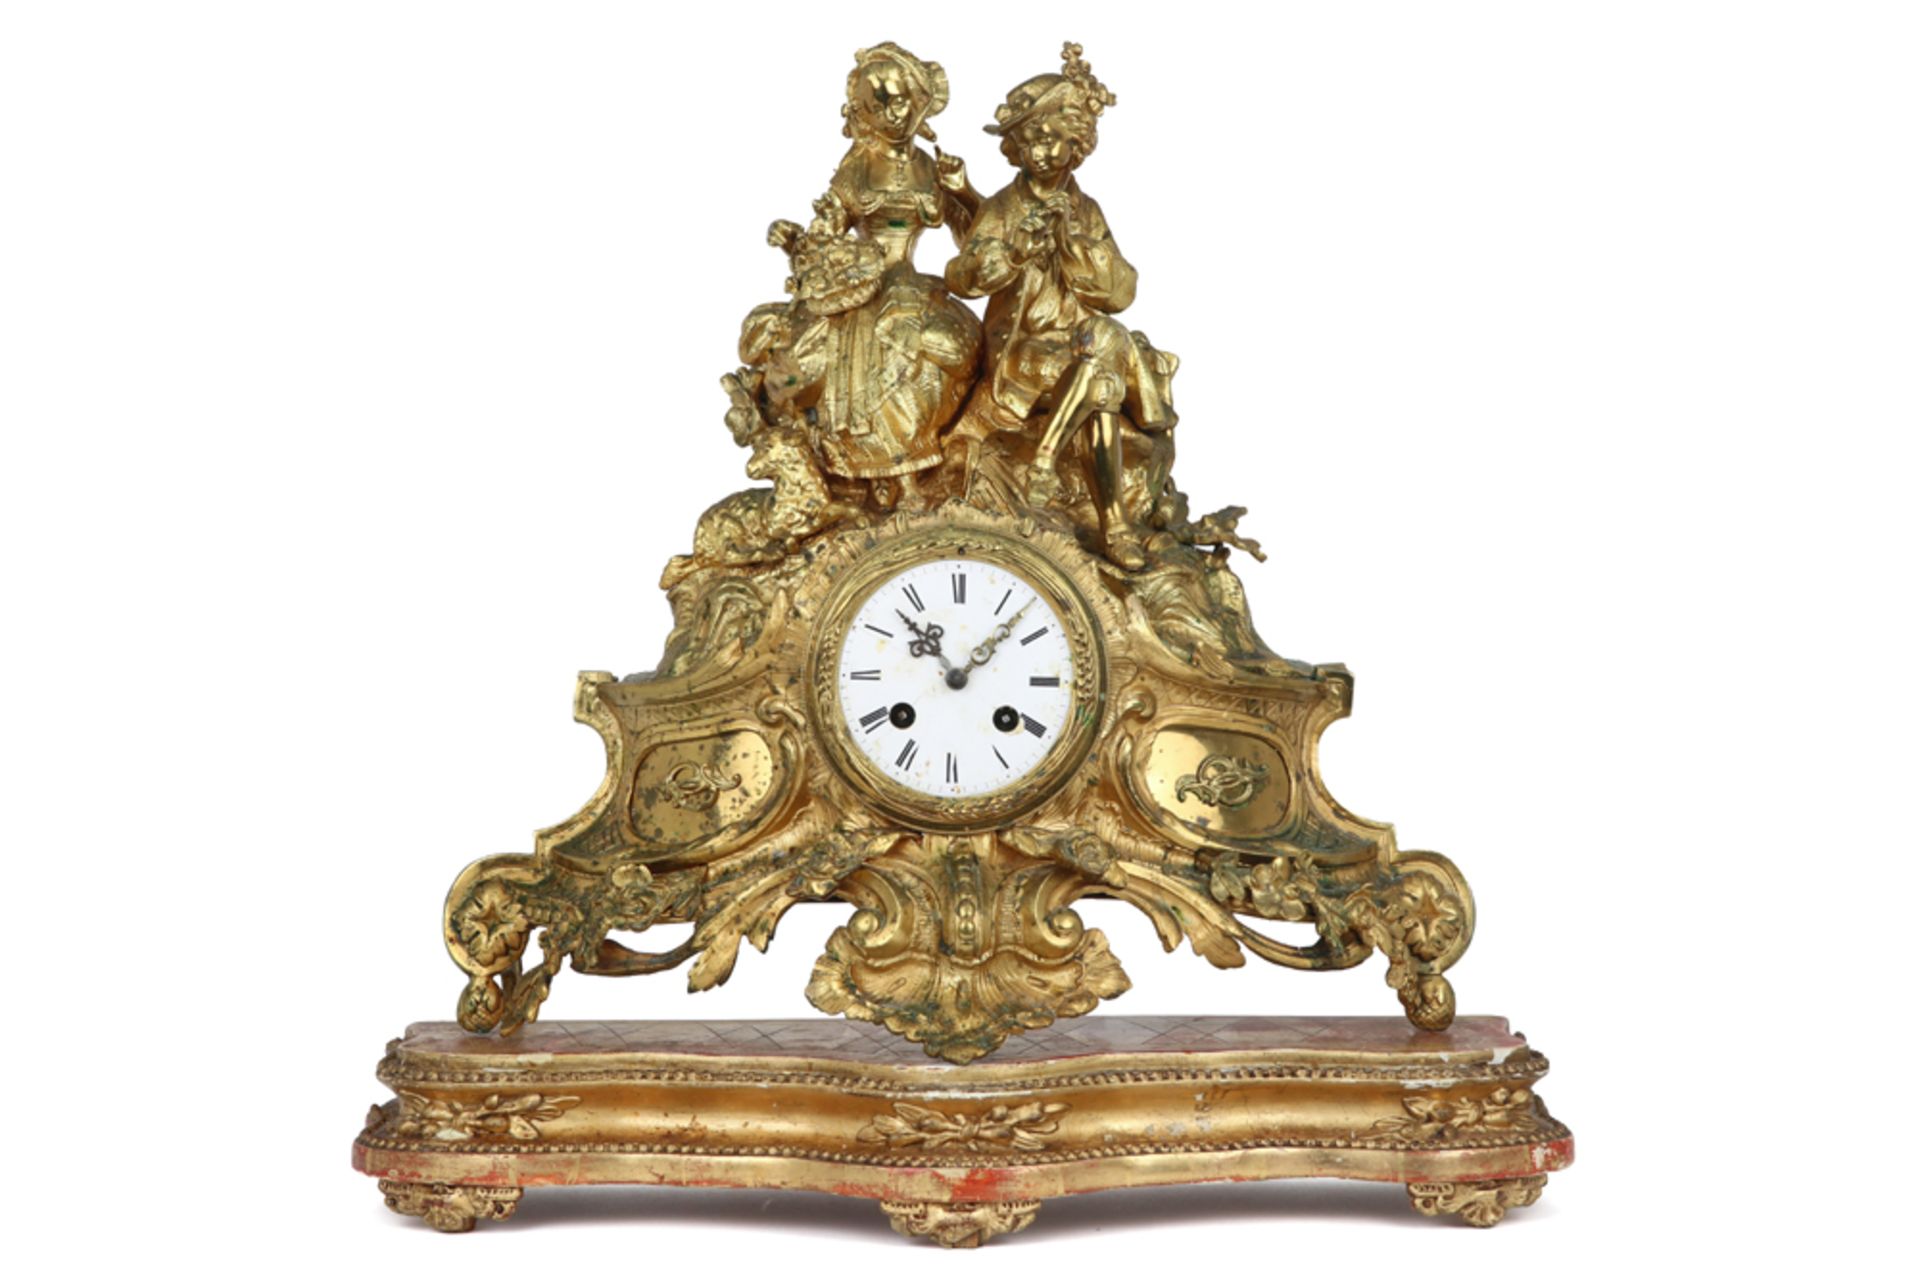 19th Cent. clock with its case in gilded metal and with a "Japy frêres 1855" signed work ||